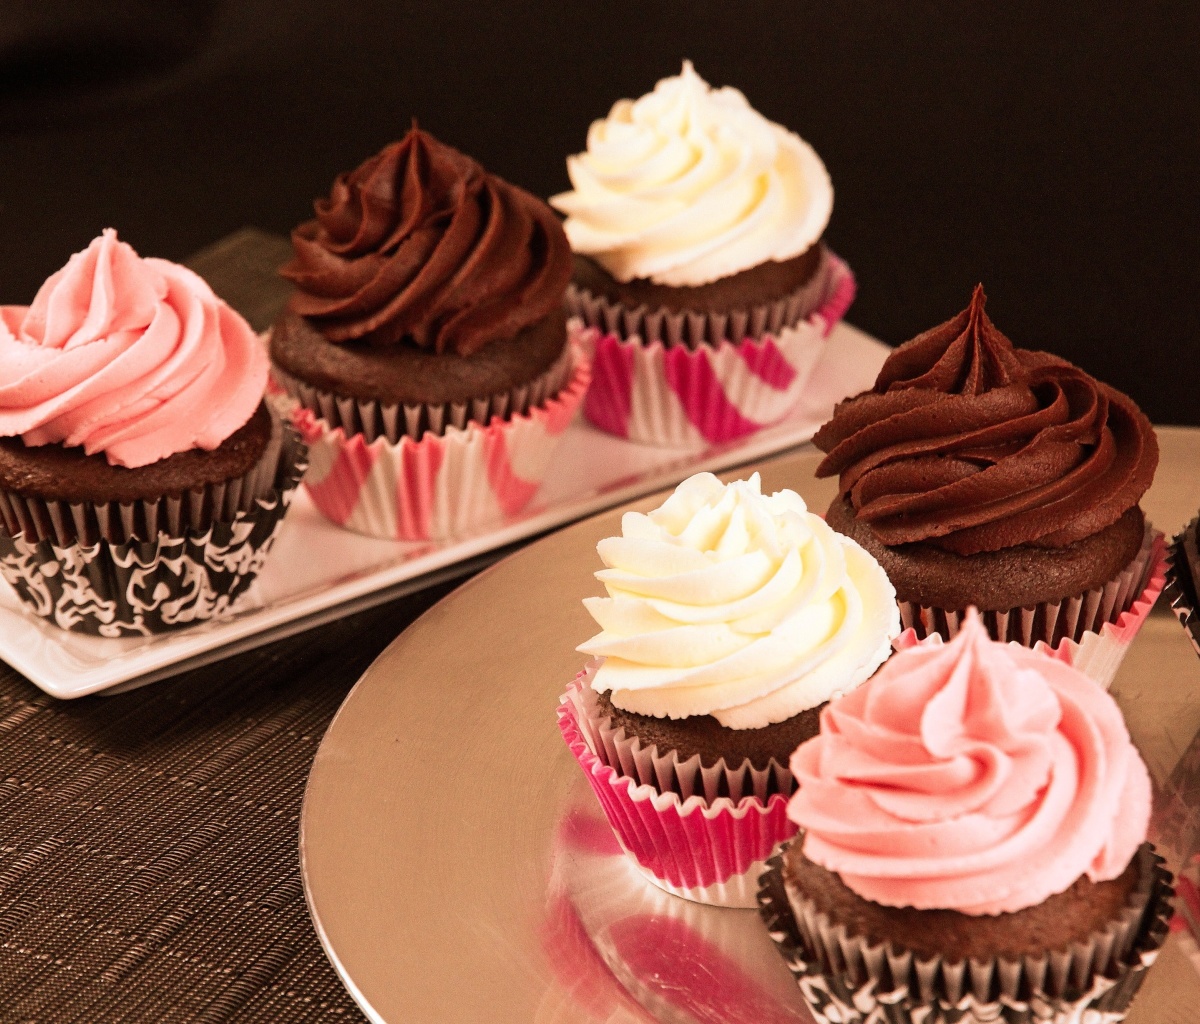 Cupcakes with Creme wallpaper 1200x1024